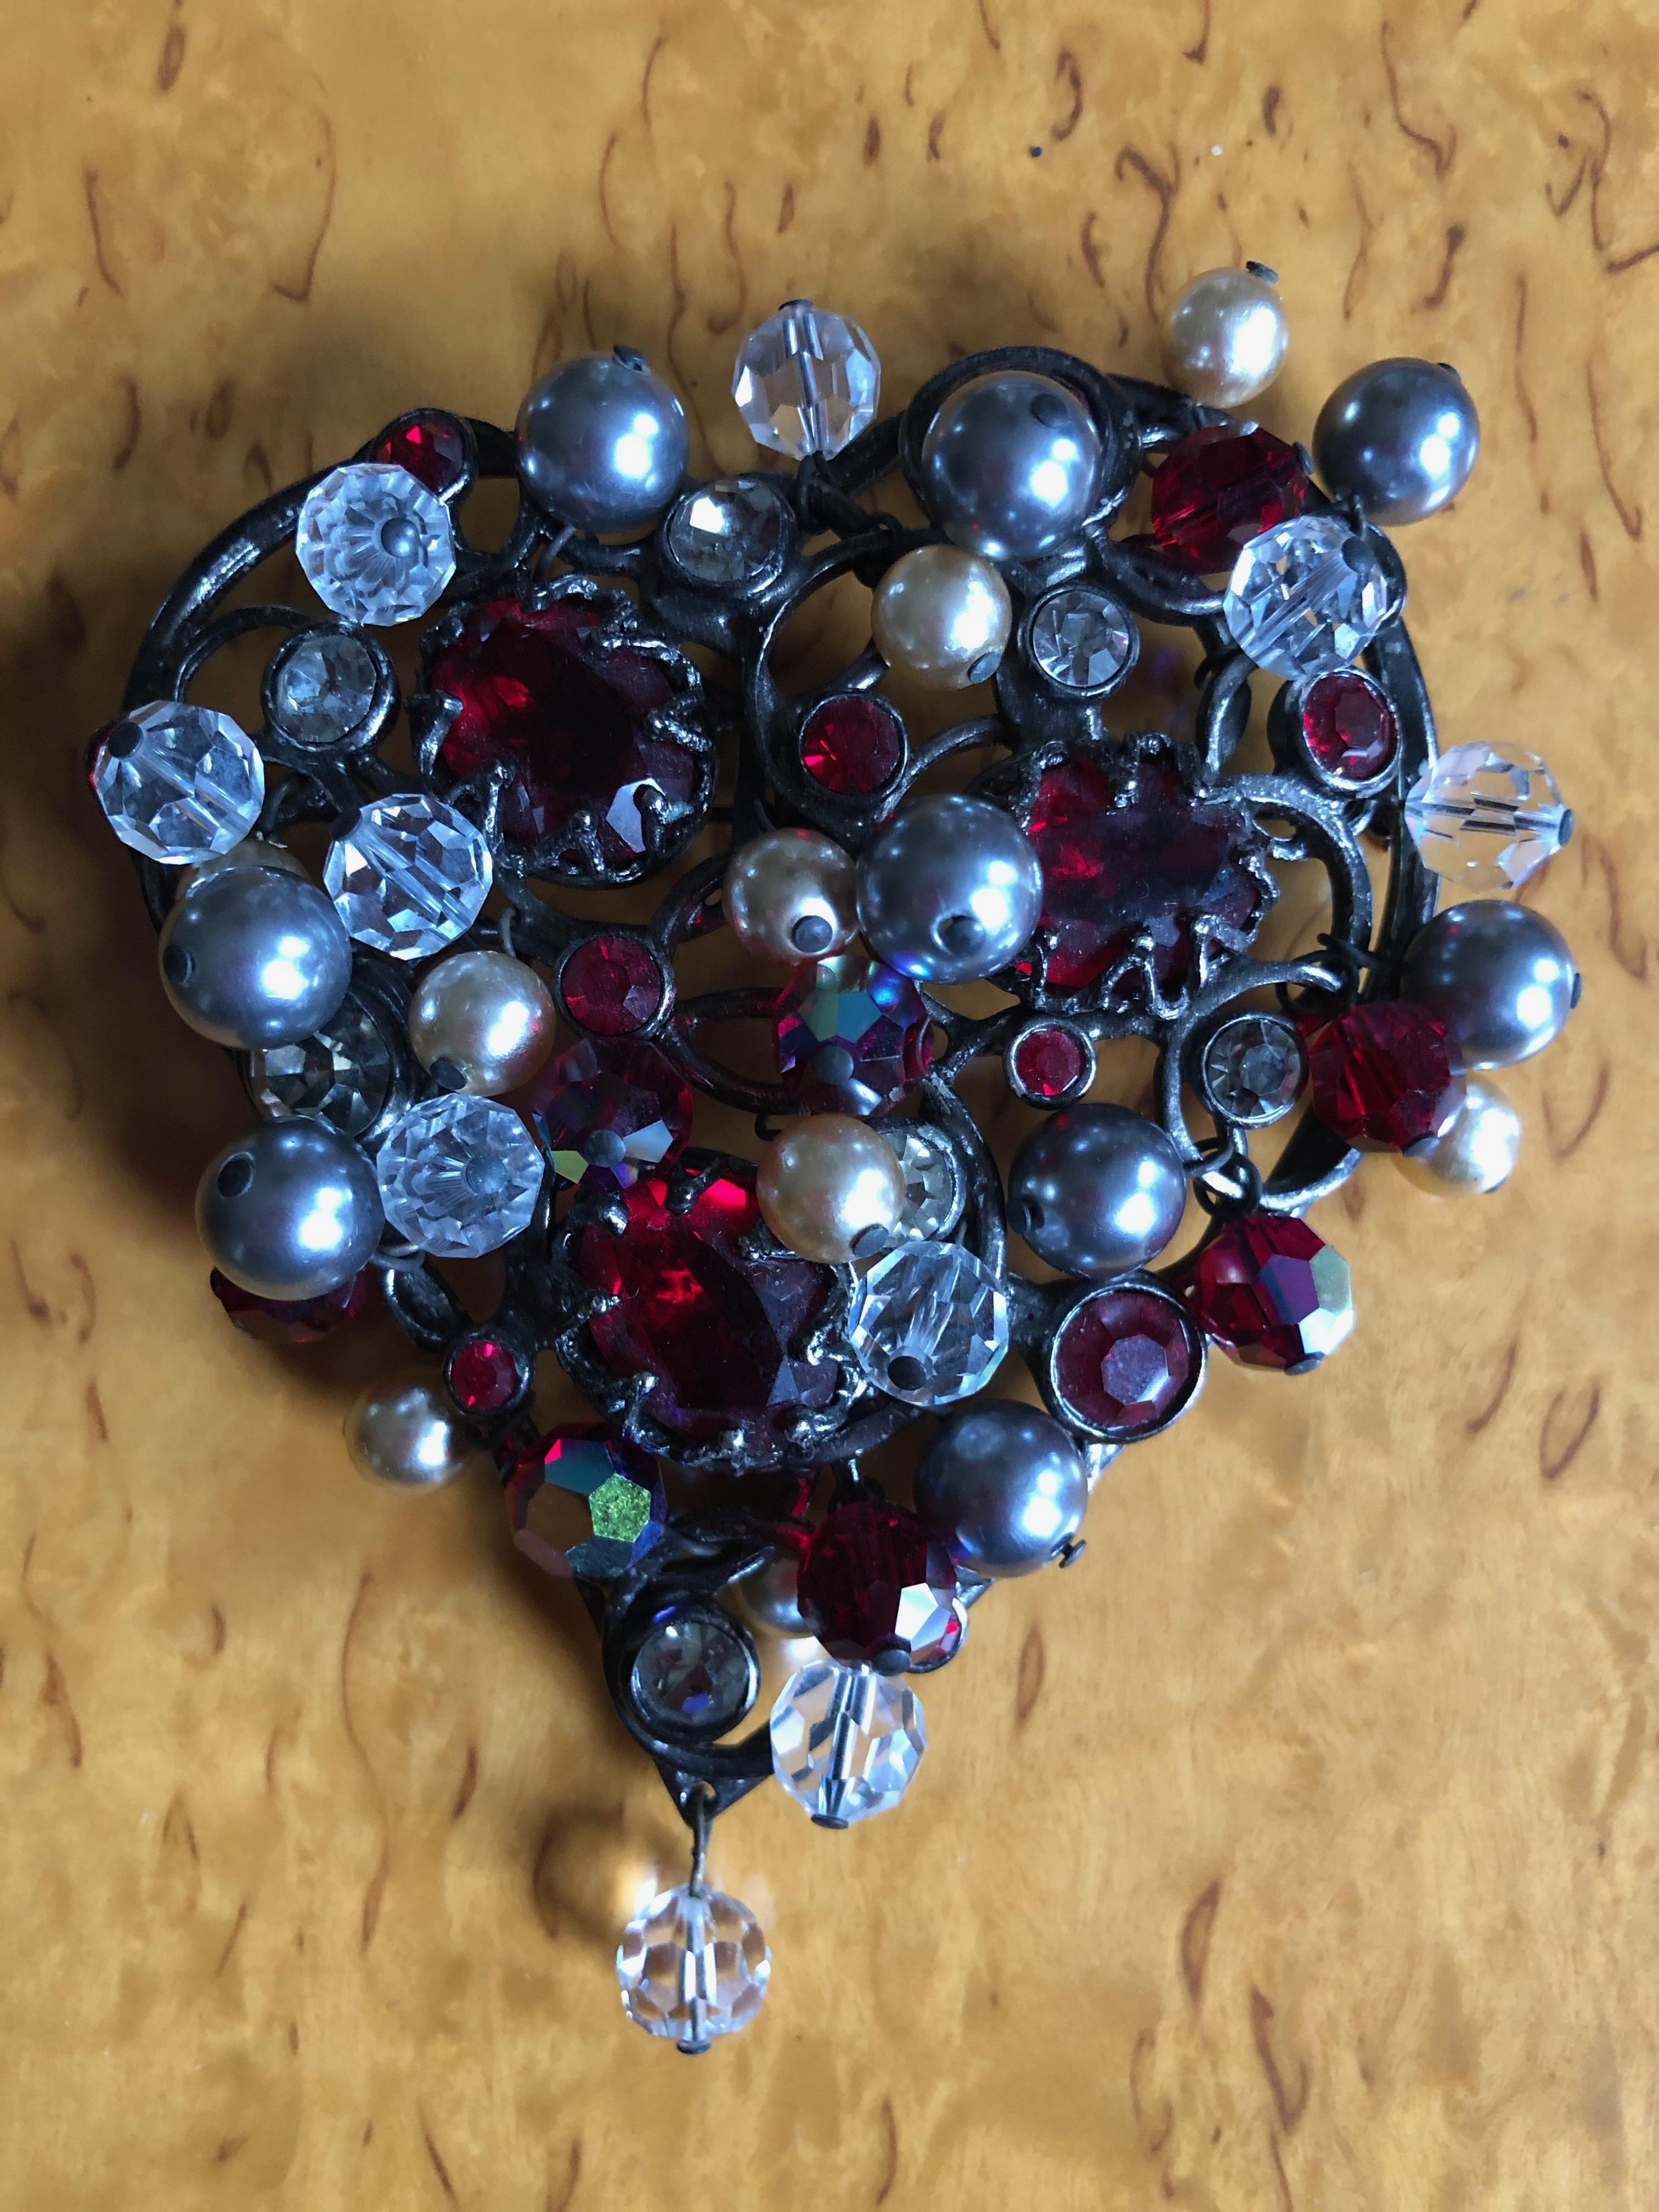 Yves Saint Laurent Rive Gauche Large Heart Pin Brooch with Tremblant Beads
Crystal set in antique gunmetal tone metal with lot's of crytsal's that trembel and move.
There is a hook on the back to attach to pearls or a chain to wear as a